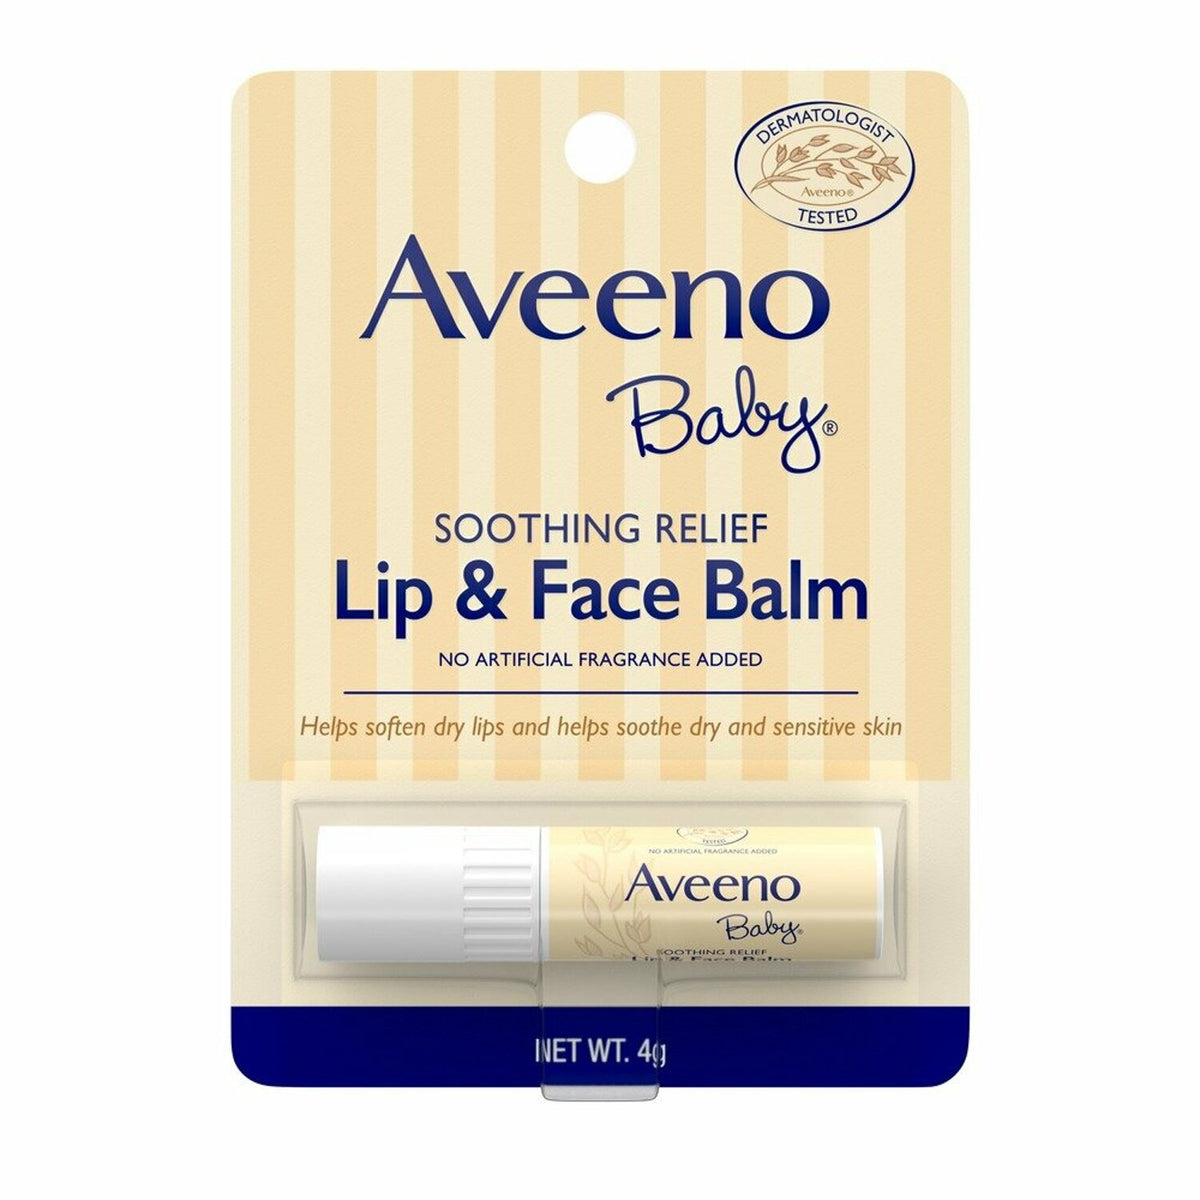 Aveeno Baby Soothing Relief Lip & Face Balm 4g